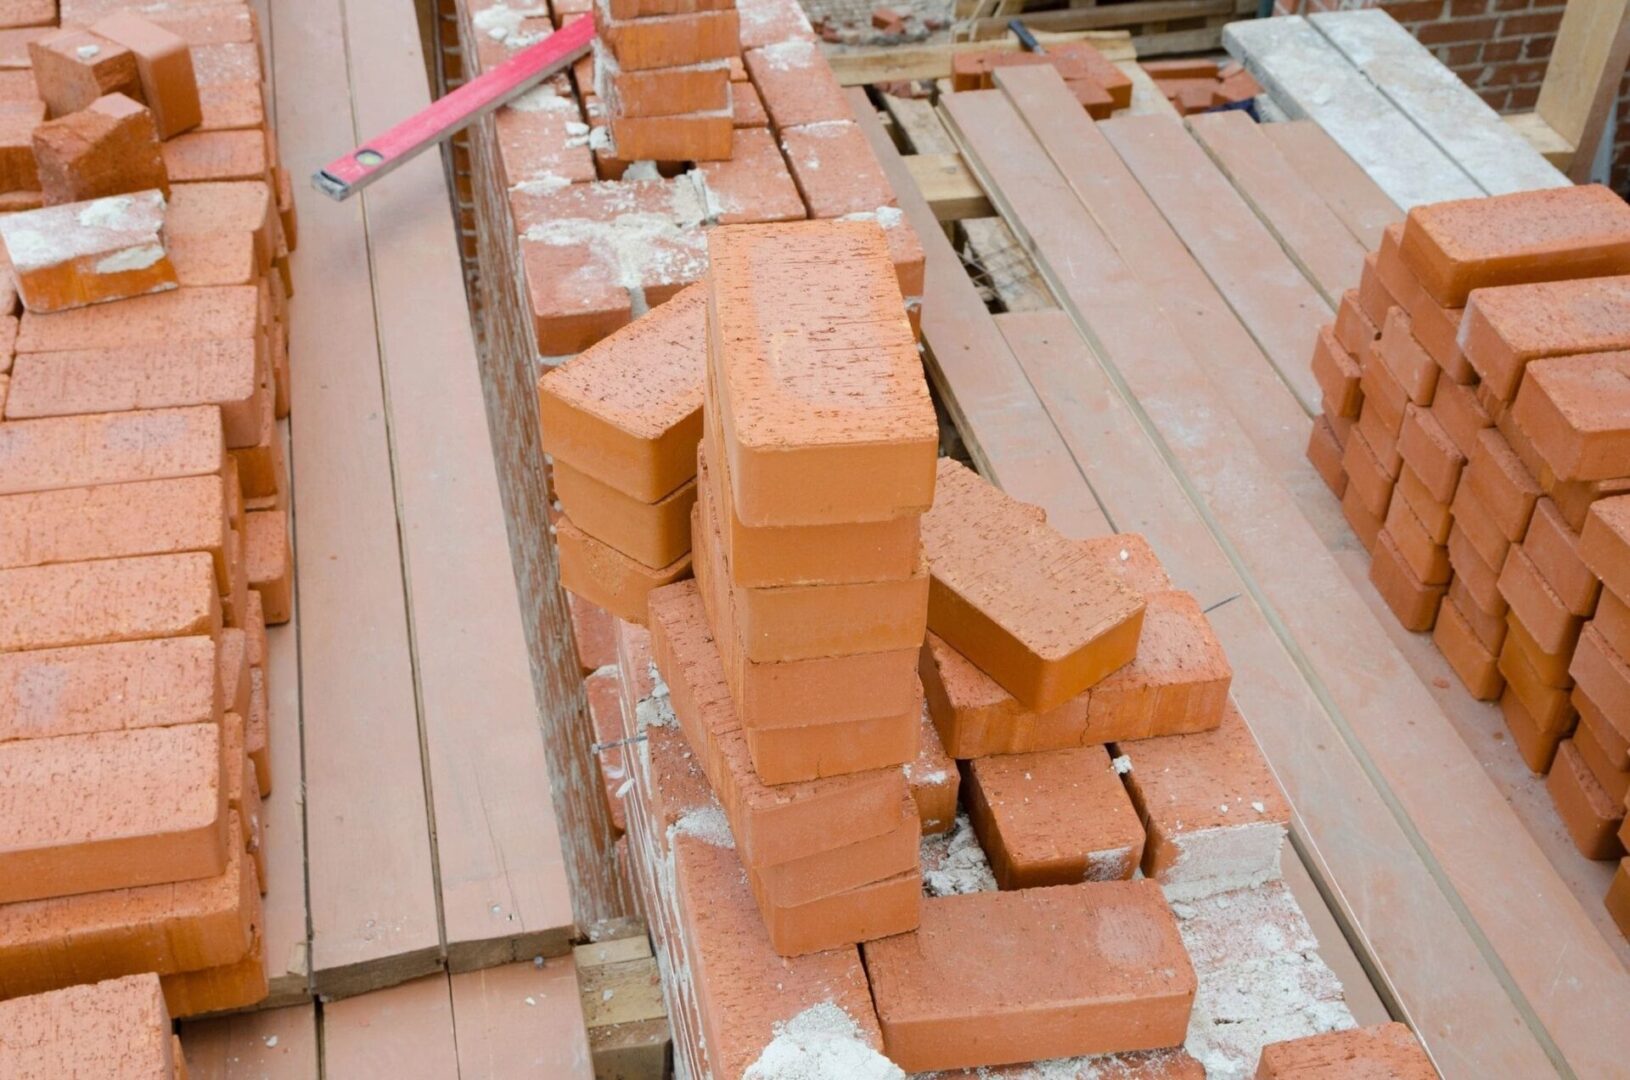 A pile of bricks on top of each other.